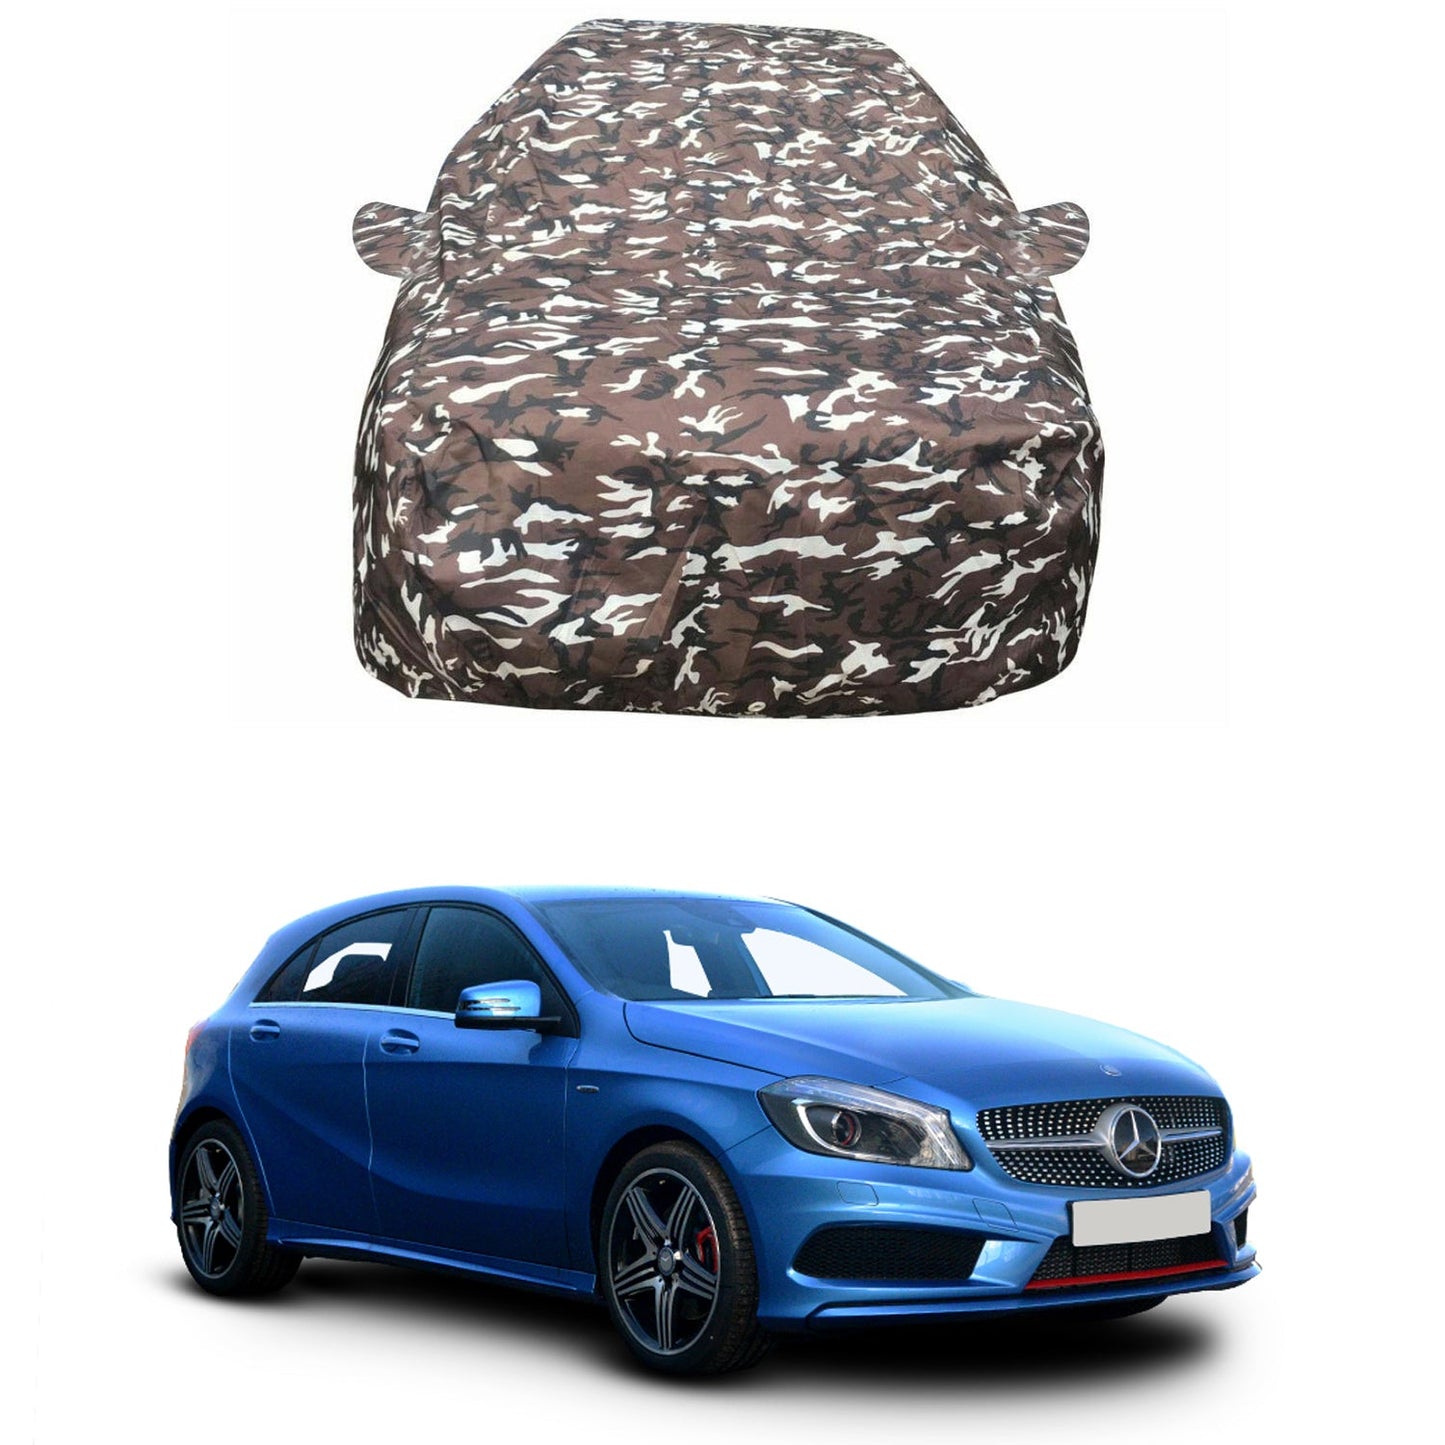 Oshotto Ranger Design Made of 100% Waterproof Fabric Multicolor Car Body Cover with Mirror Pockets For Mercedes-Benz A-Class A-180 (2015-2019)